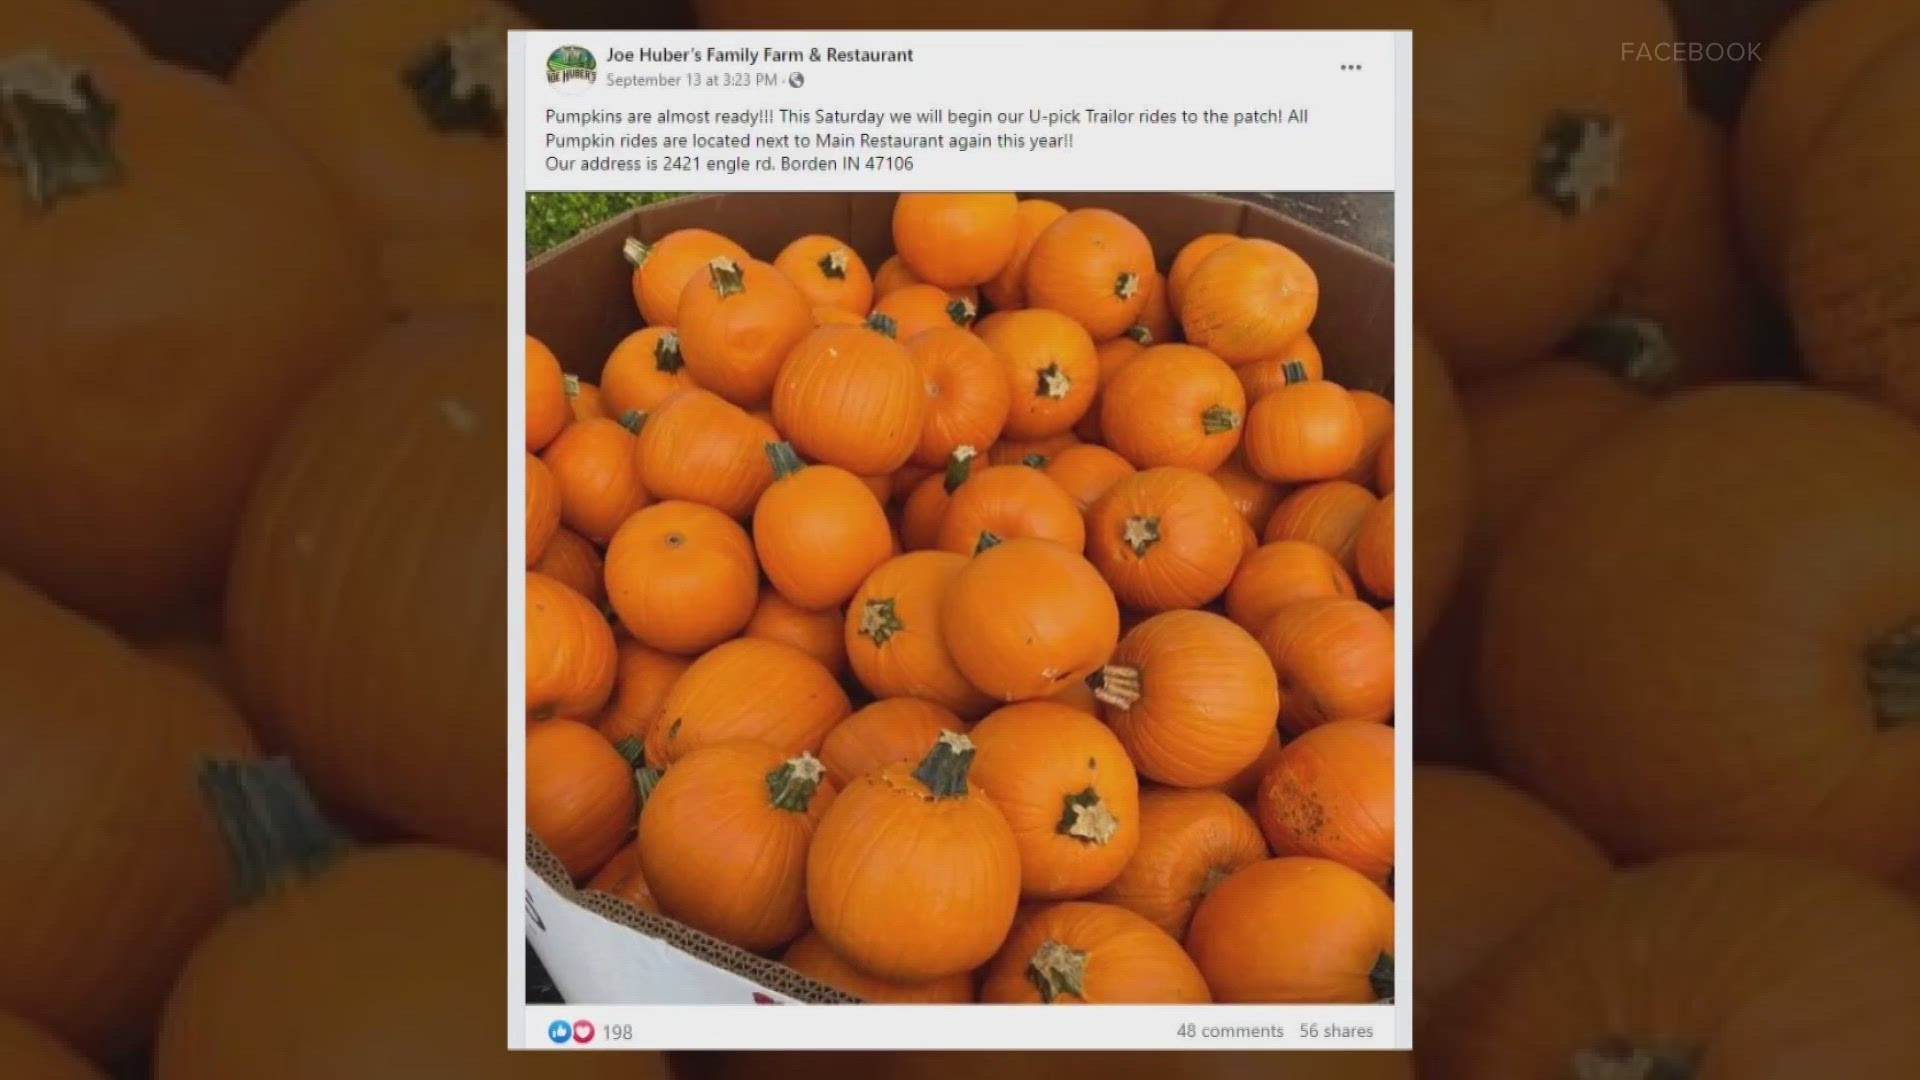 At Huber's farm, you can pick pumpkins, go on trailer rides and grab some country-style food at the restaurant.